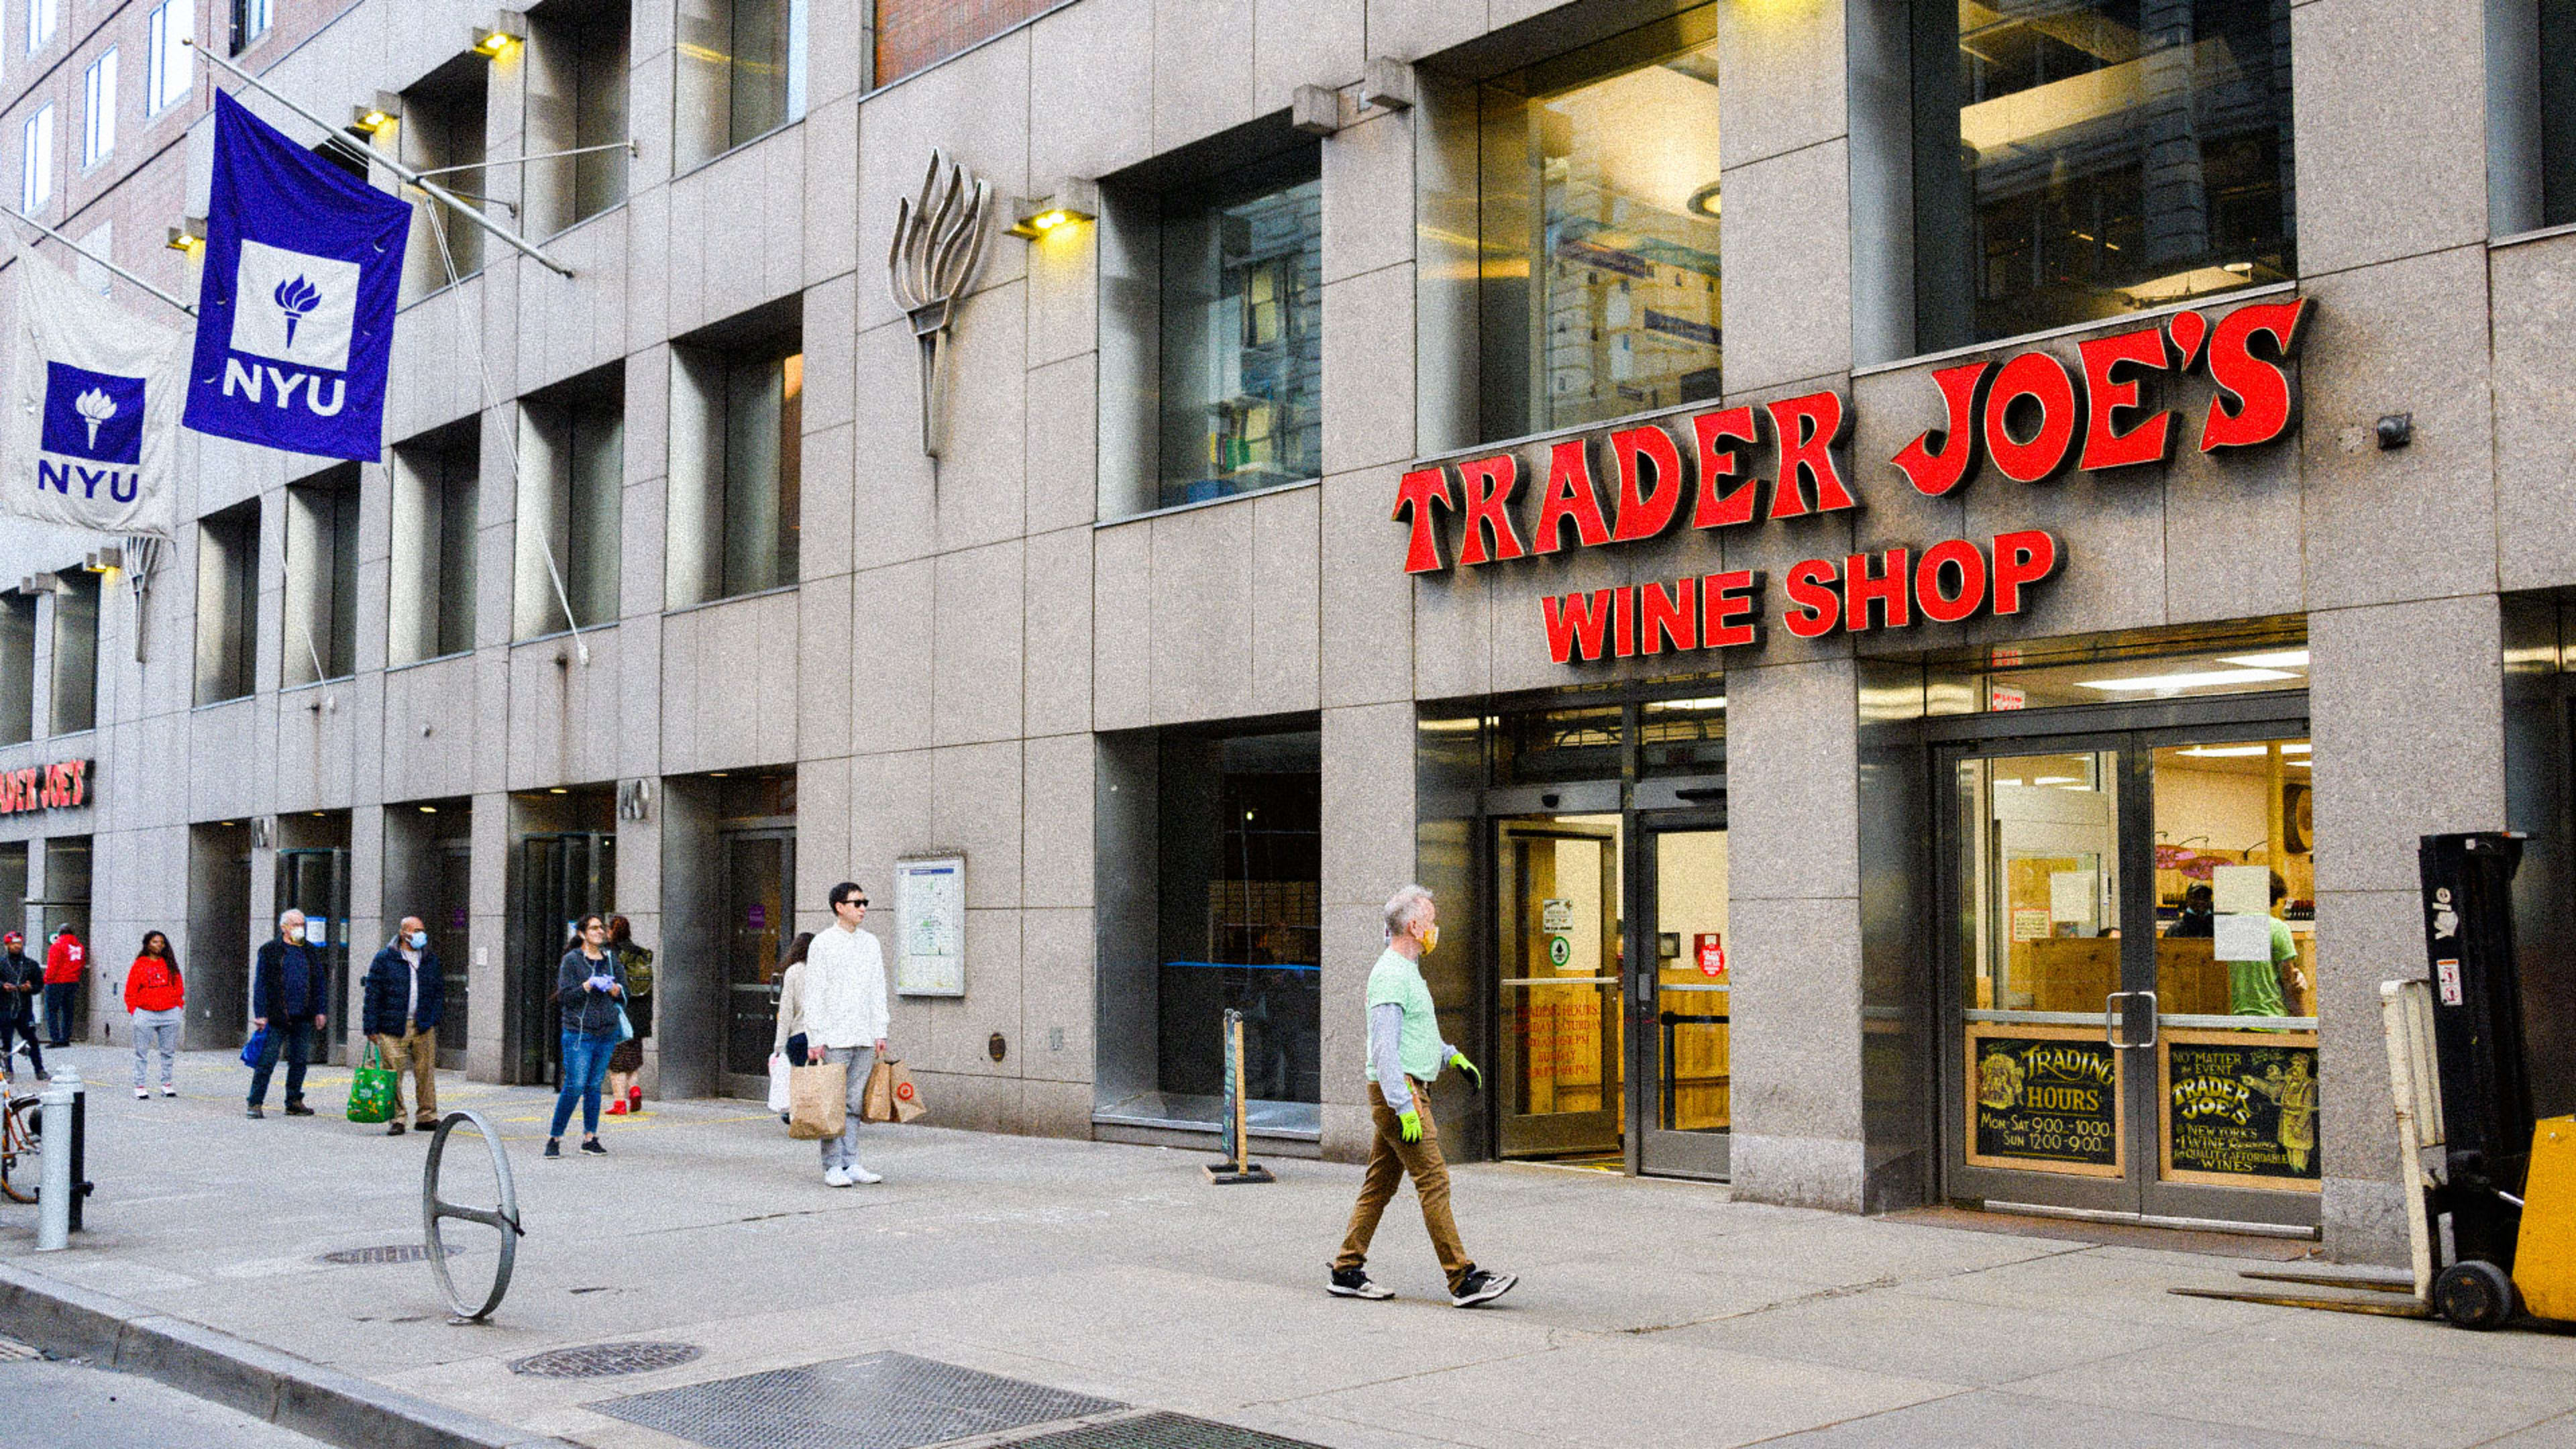 Trader Joe’s workers say it closed its sole NYC wine shop because they wanted to unionize it